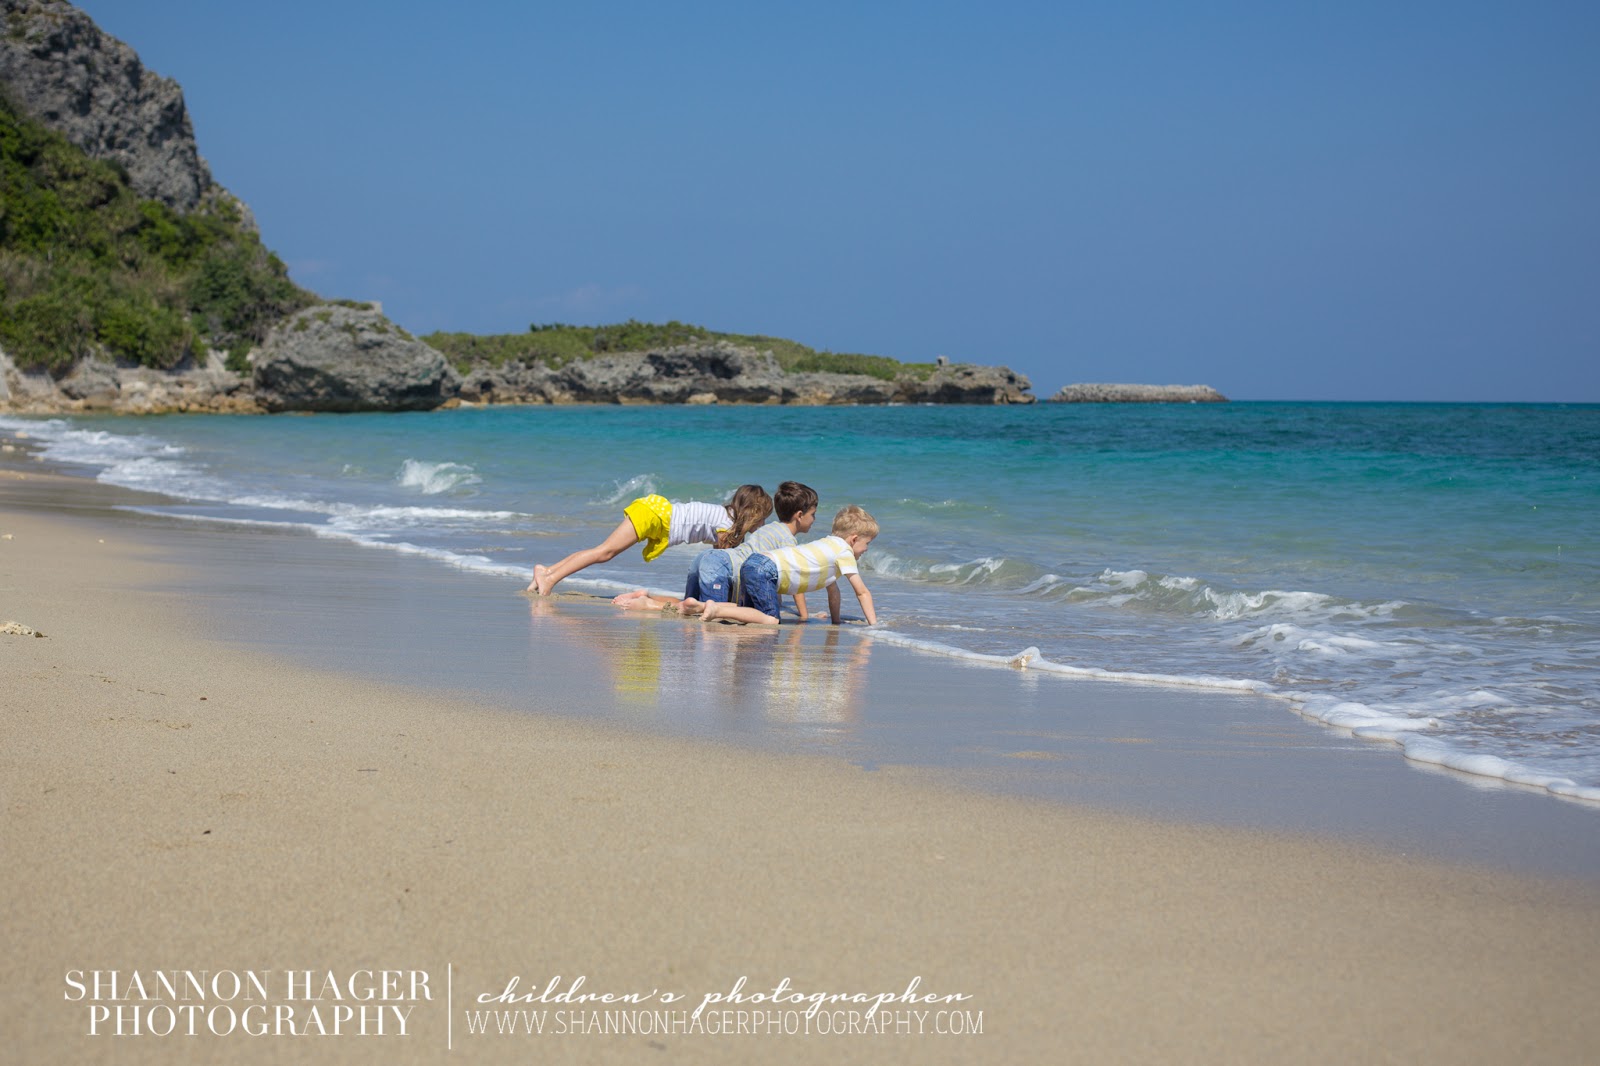 Children's Photography by Shannon Hager Photography, Okinawa